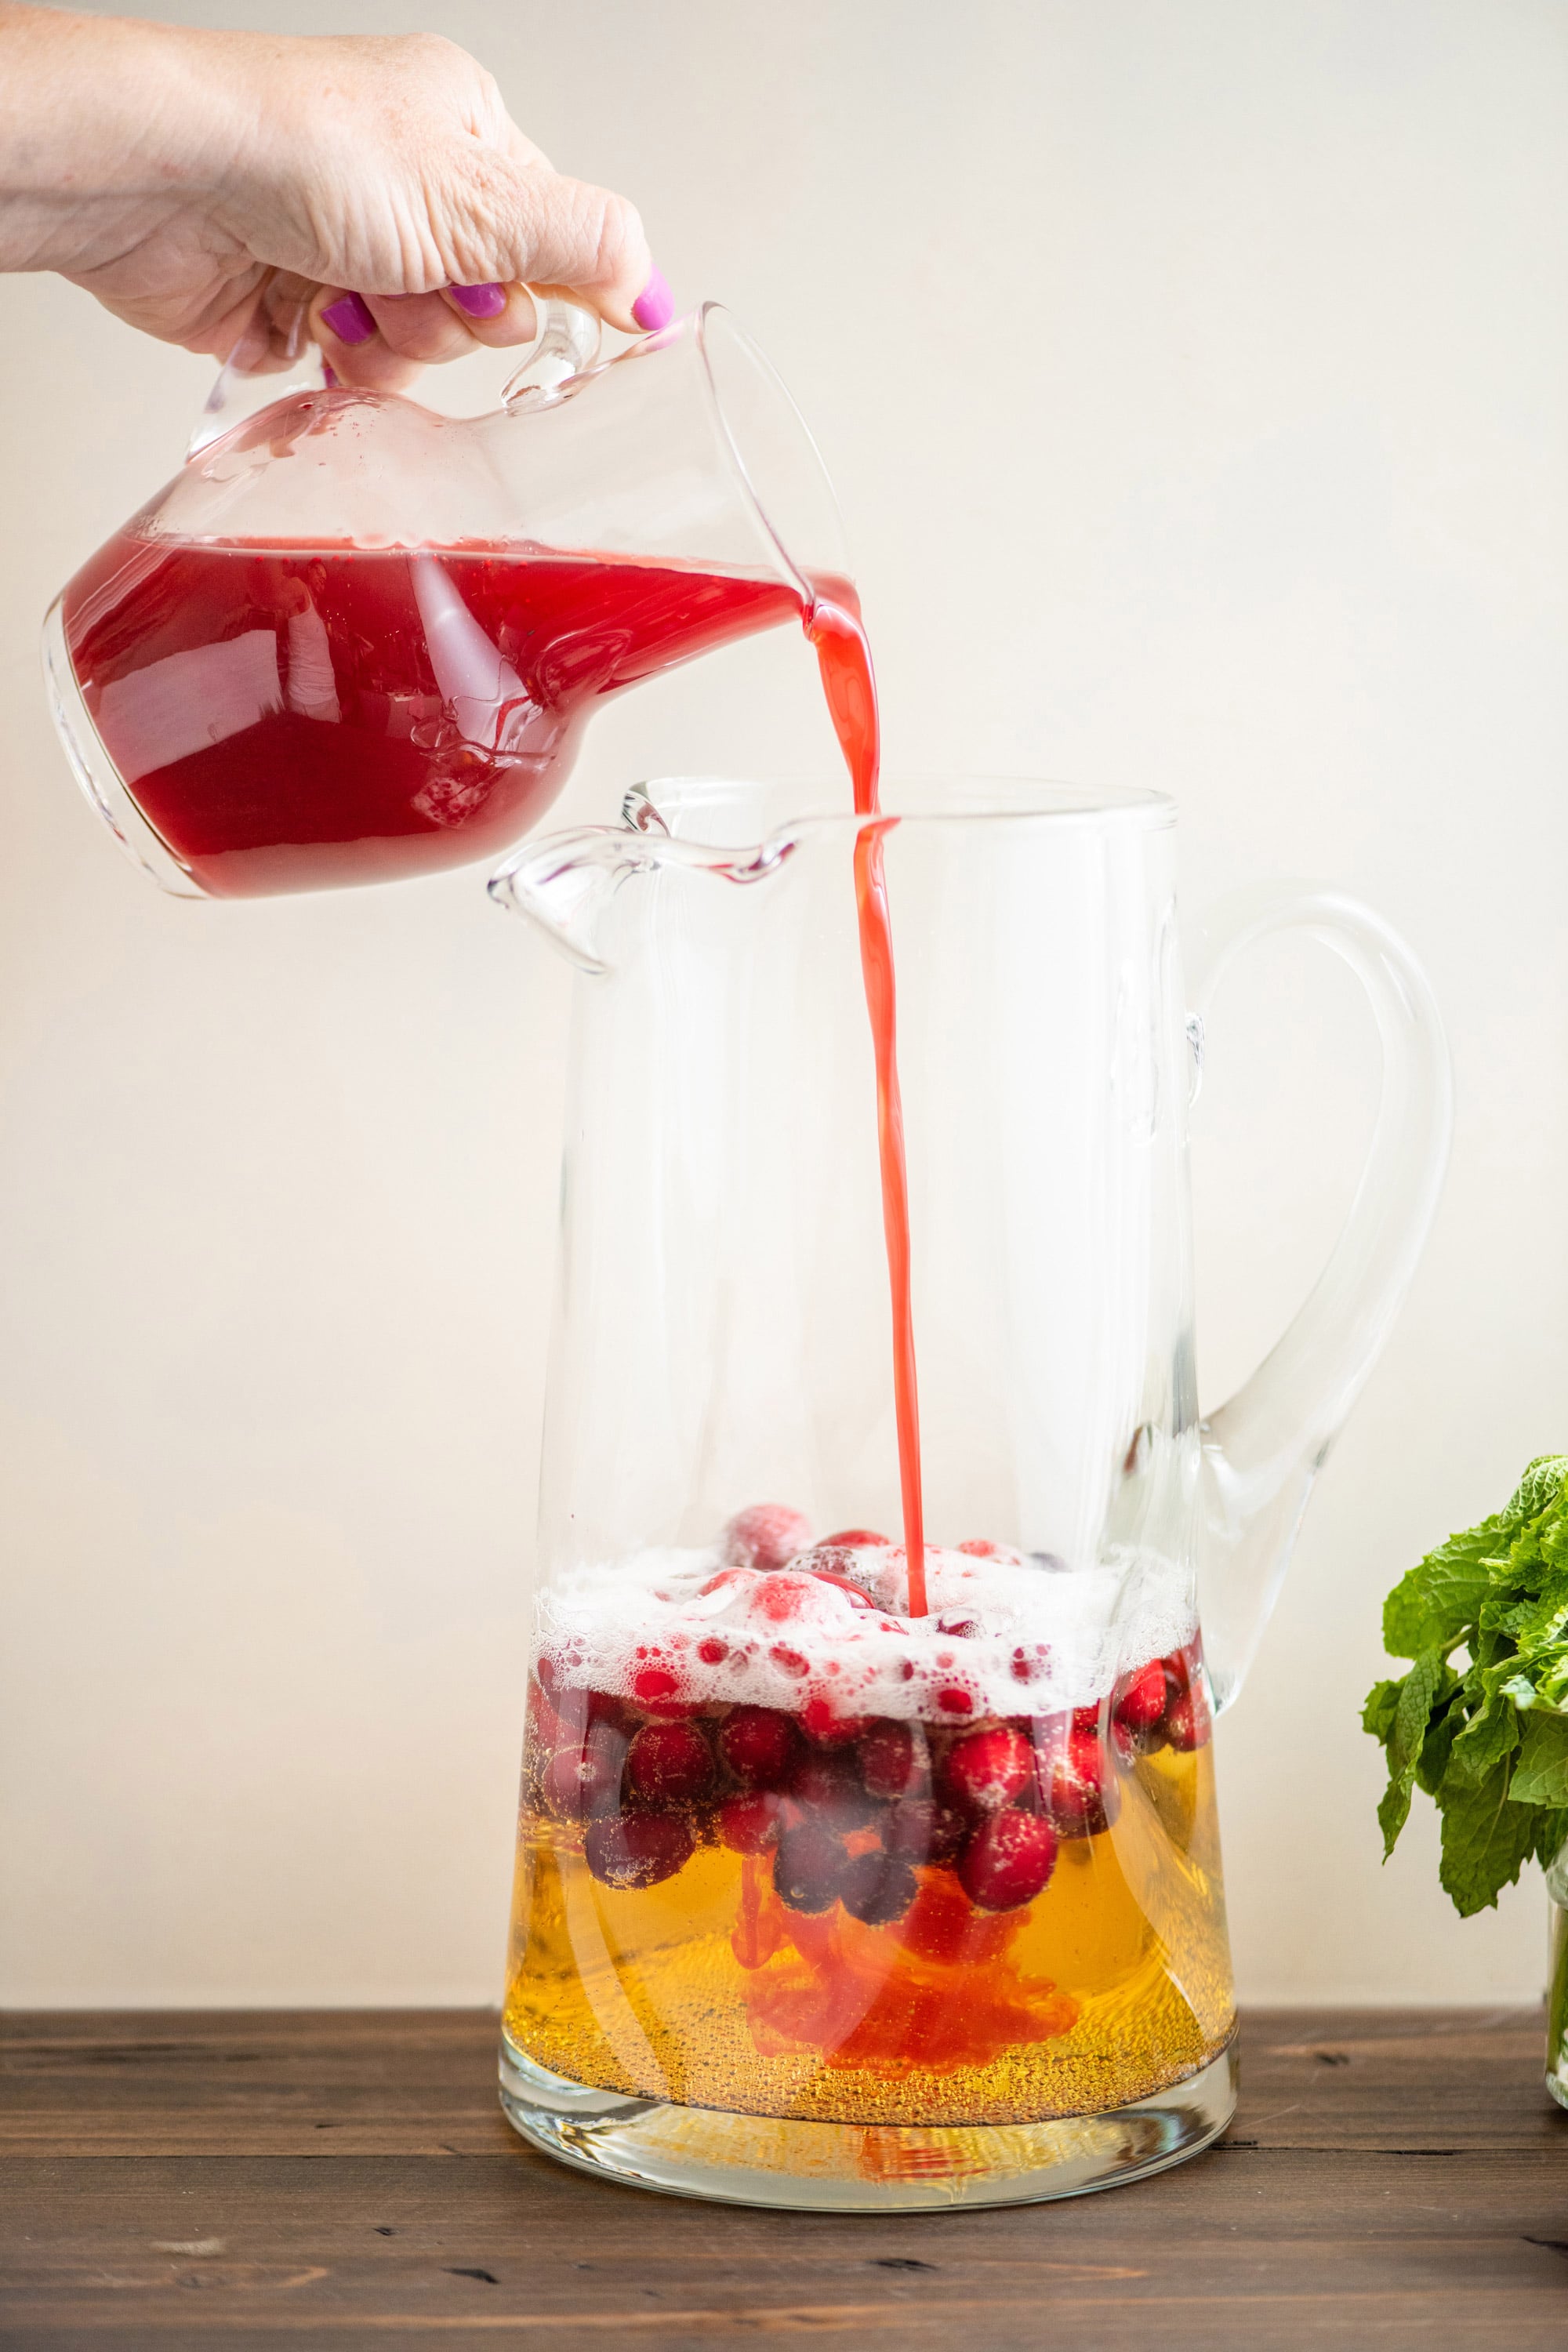 Cranberry shrub being poured into a pitcher with sparkling wine and cranberries in it.